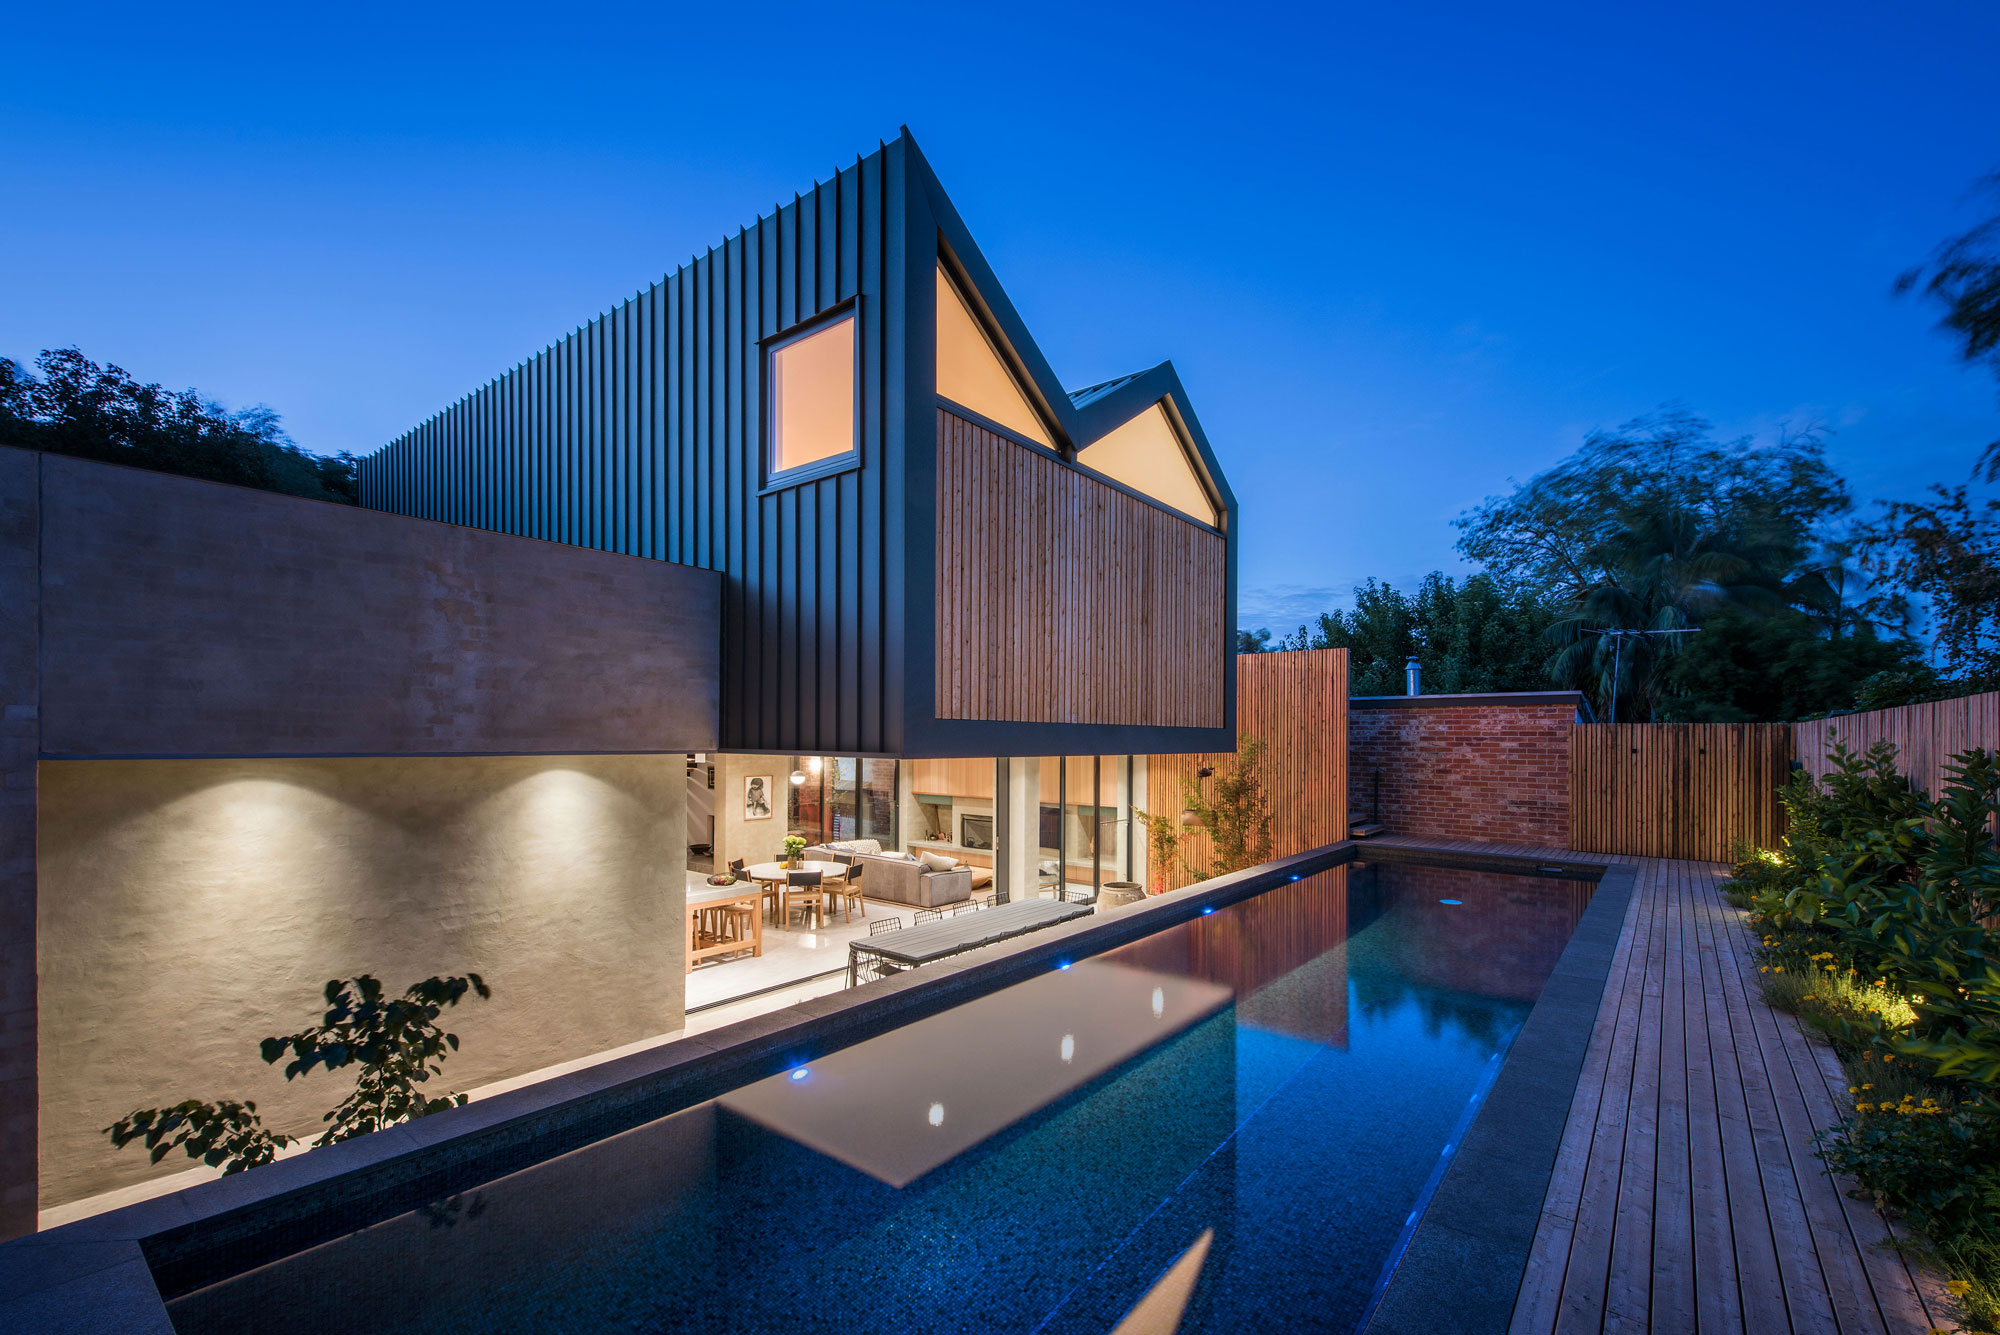 ArchDaily – Millswood House